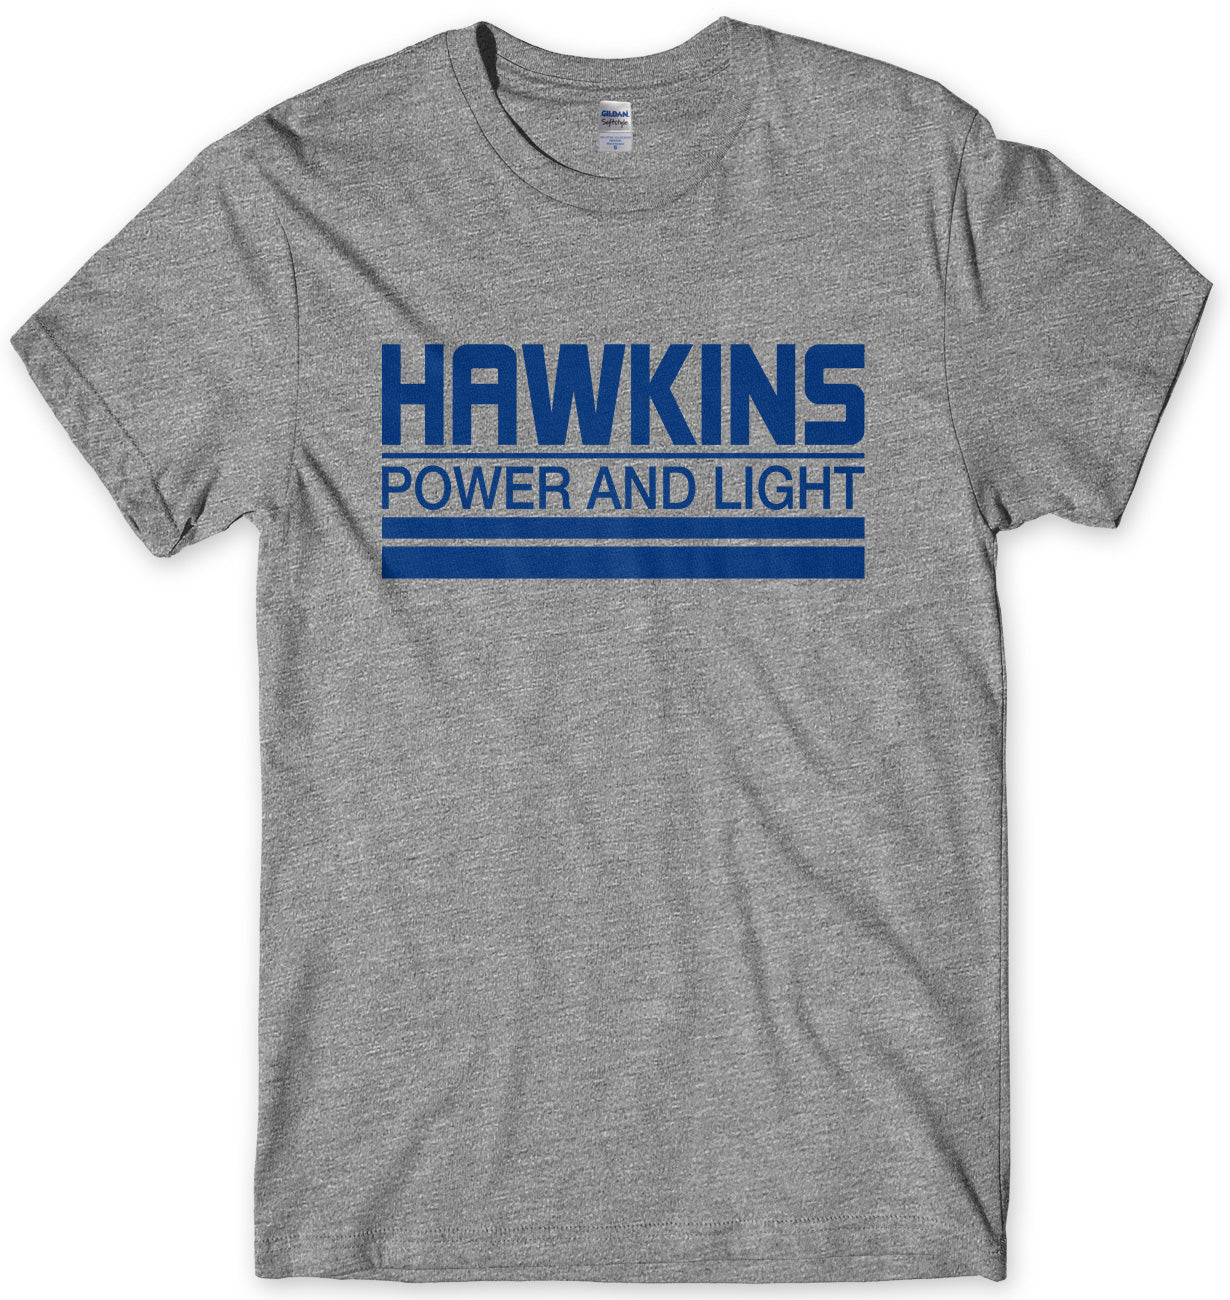 HAWKINS POWER AND LIGHT - INSPIRED BY STRANGER THINGS MENS UNISEX T-SHIRT